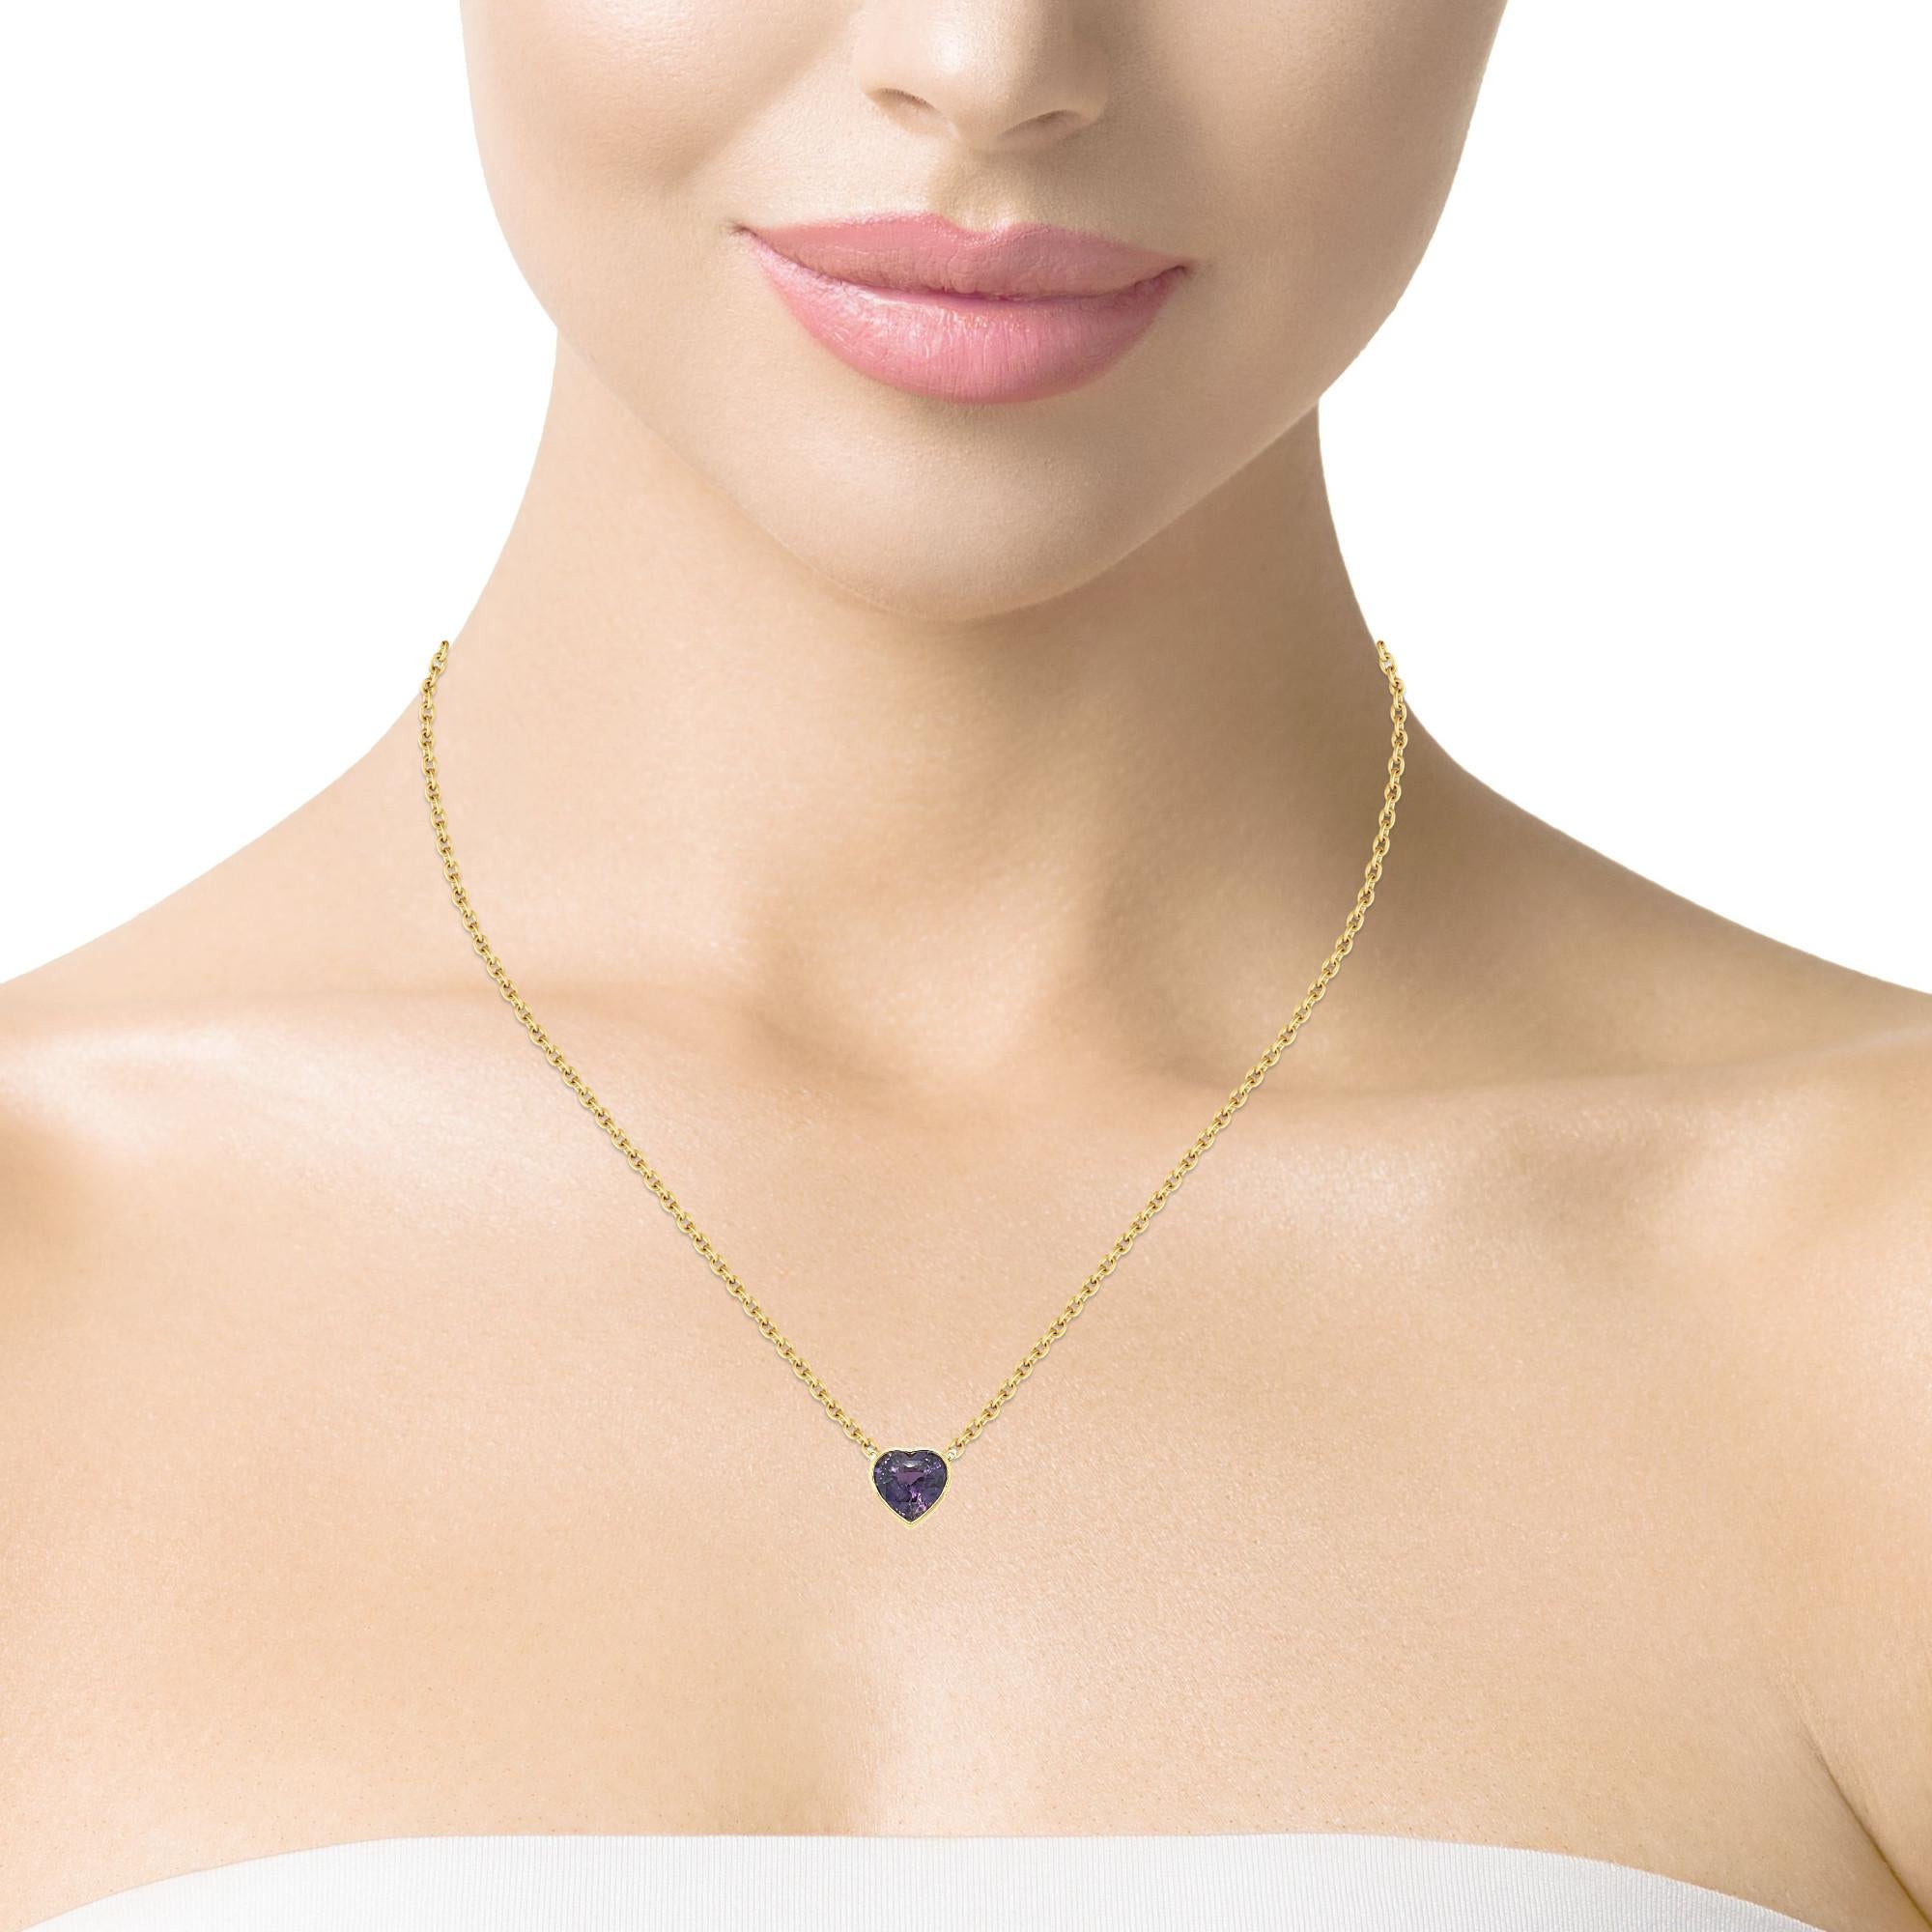 GIA Certified Unheated 3.56 Carat Purple Sapphire Heart Necklace in 18k Gold For Sale 4